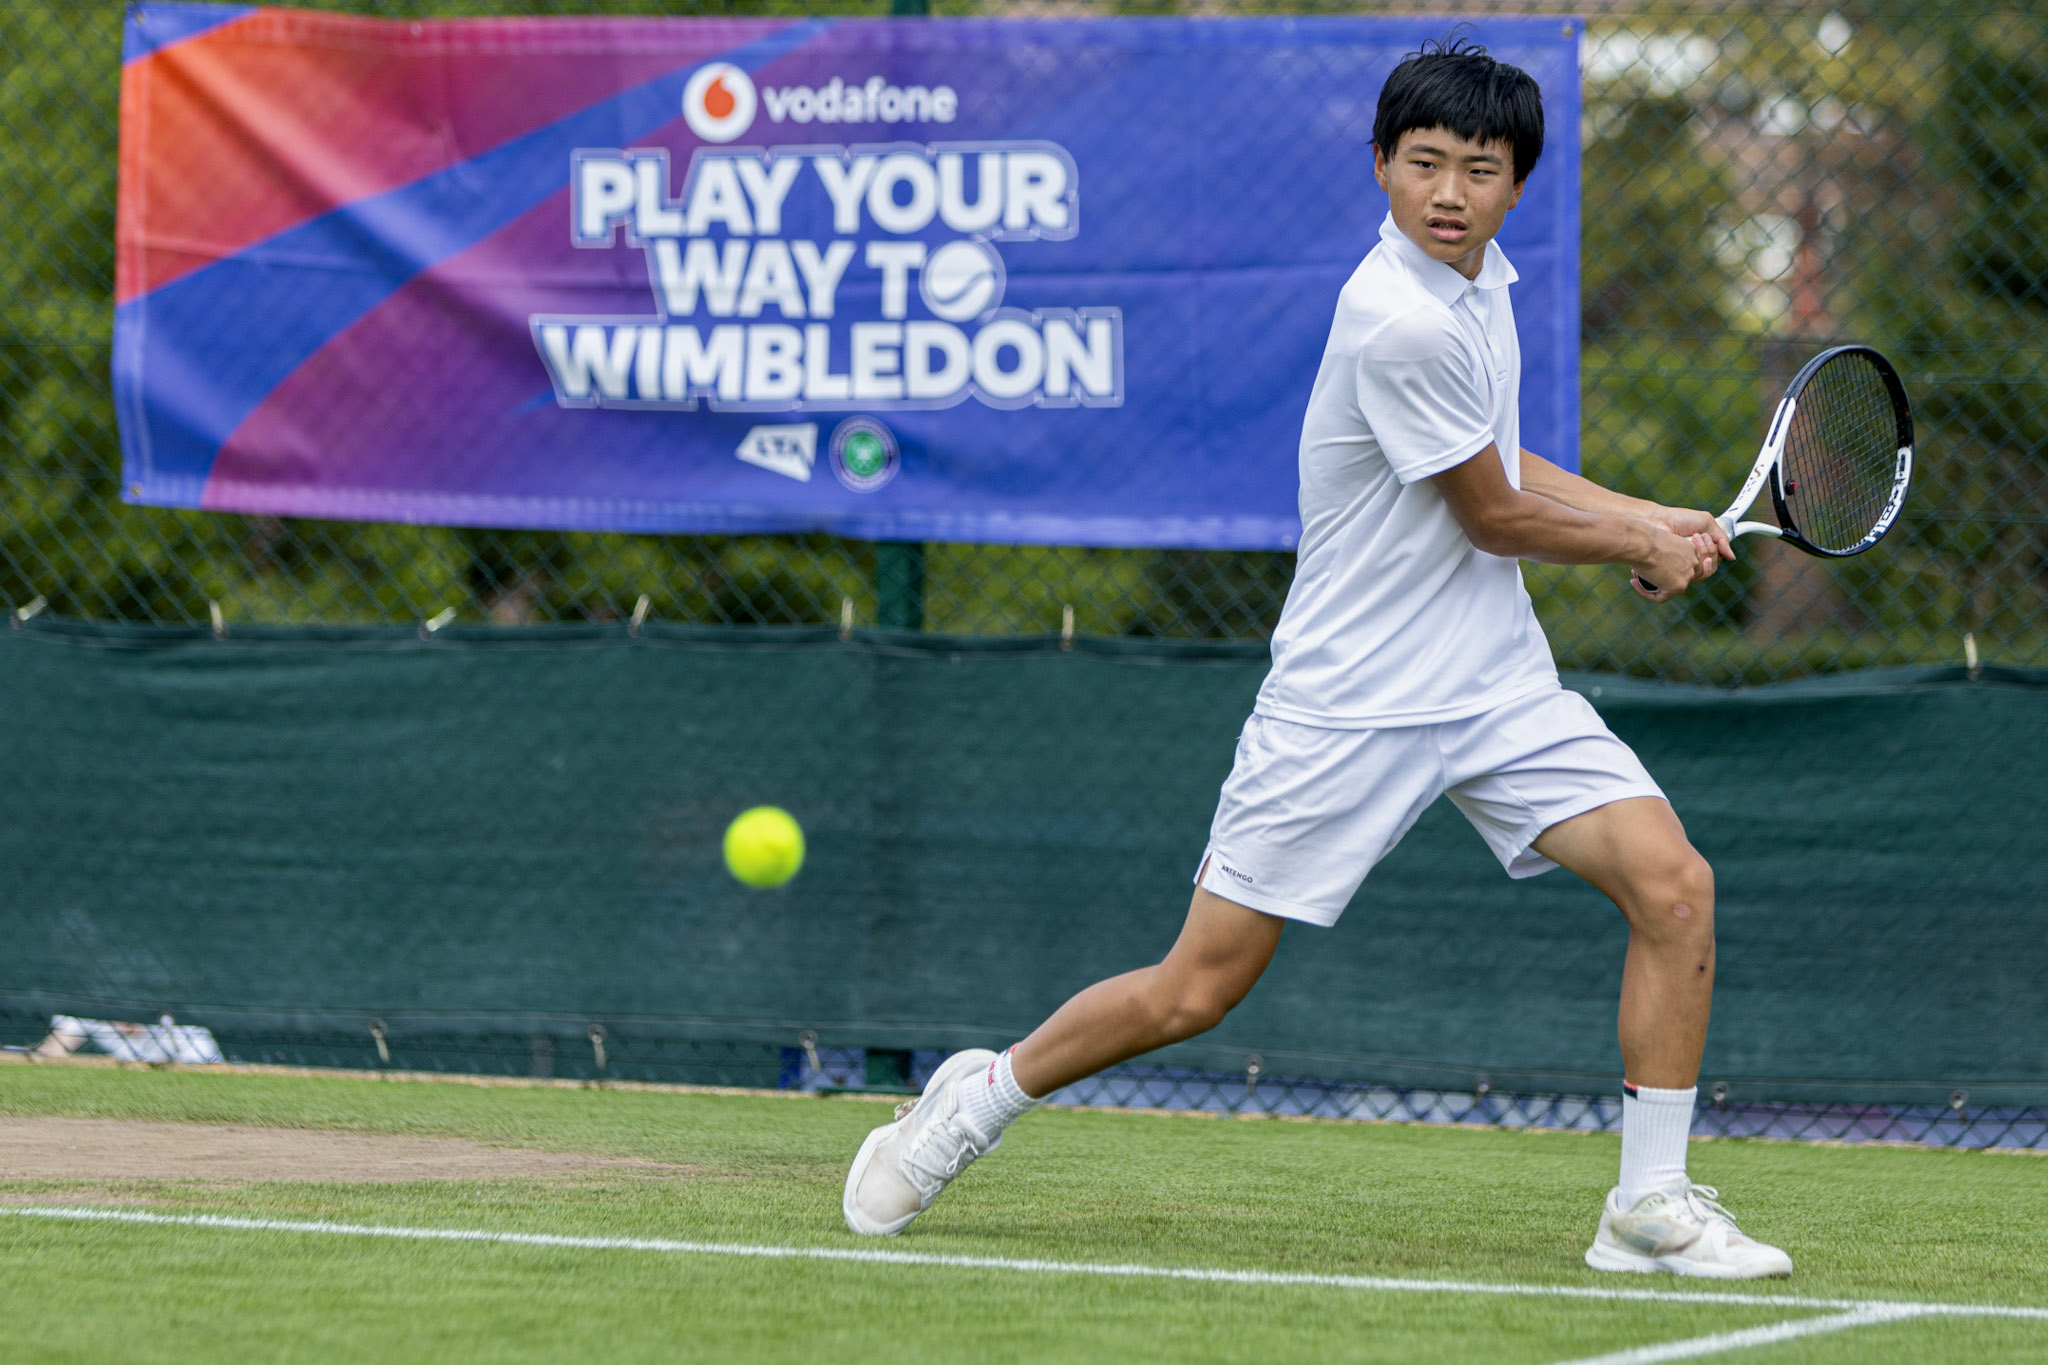 image of a boy playing tennis on a grass court